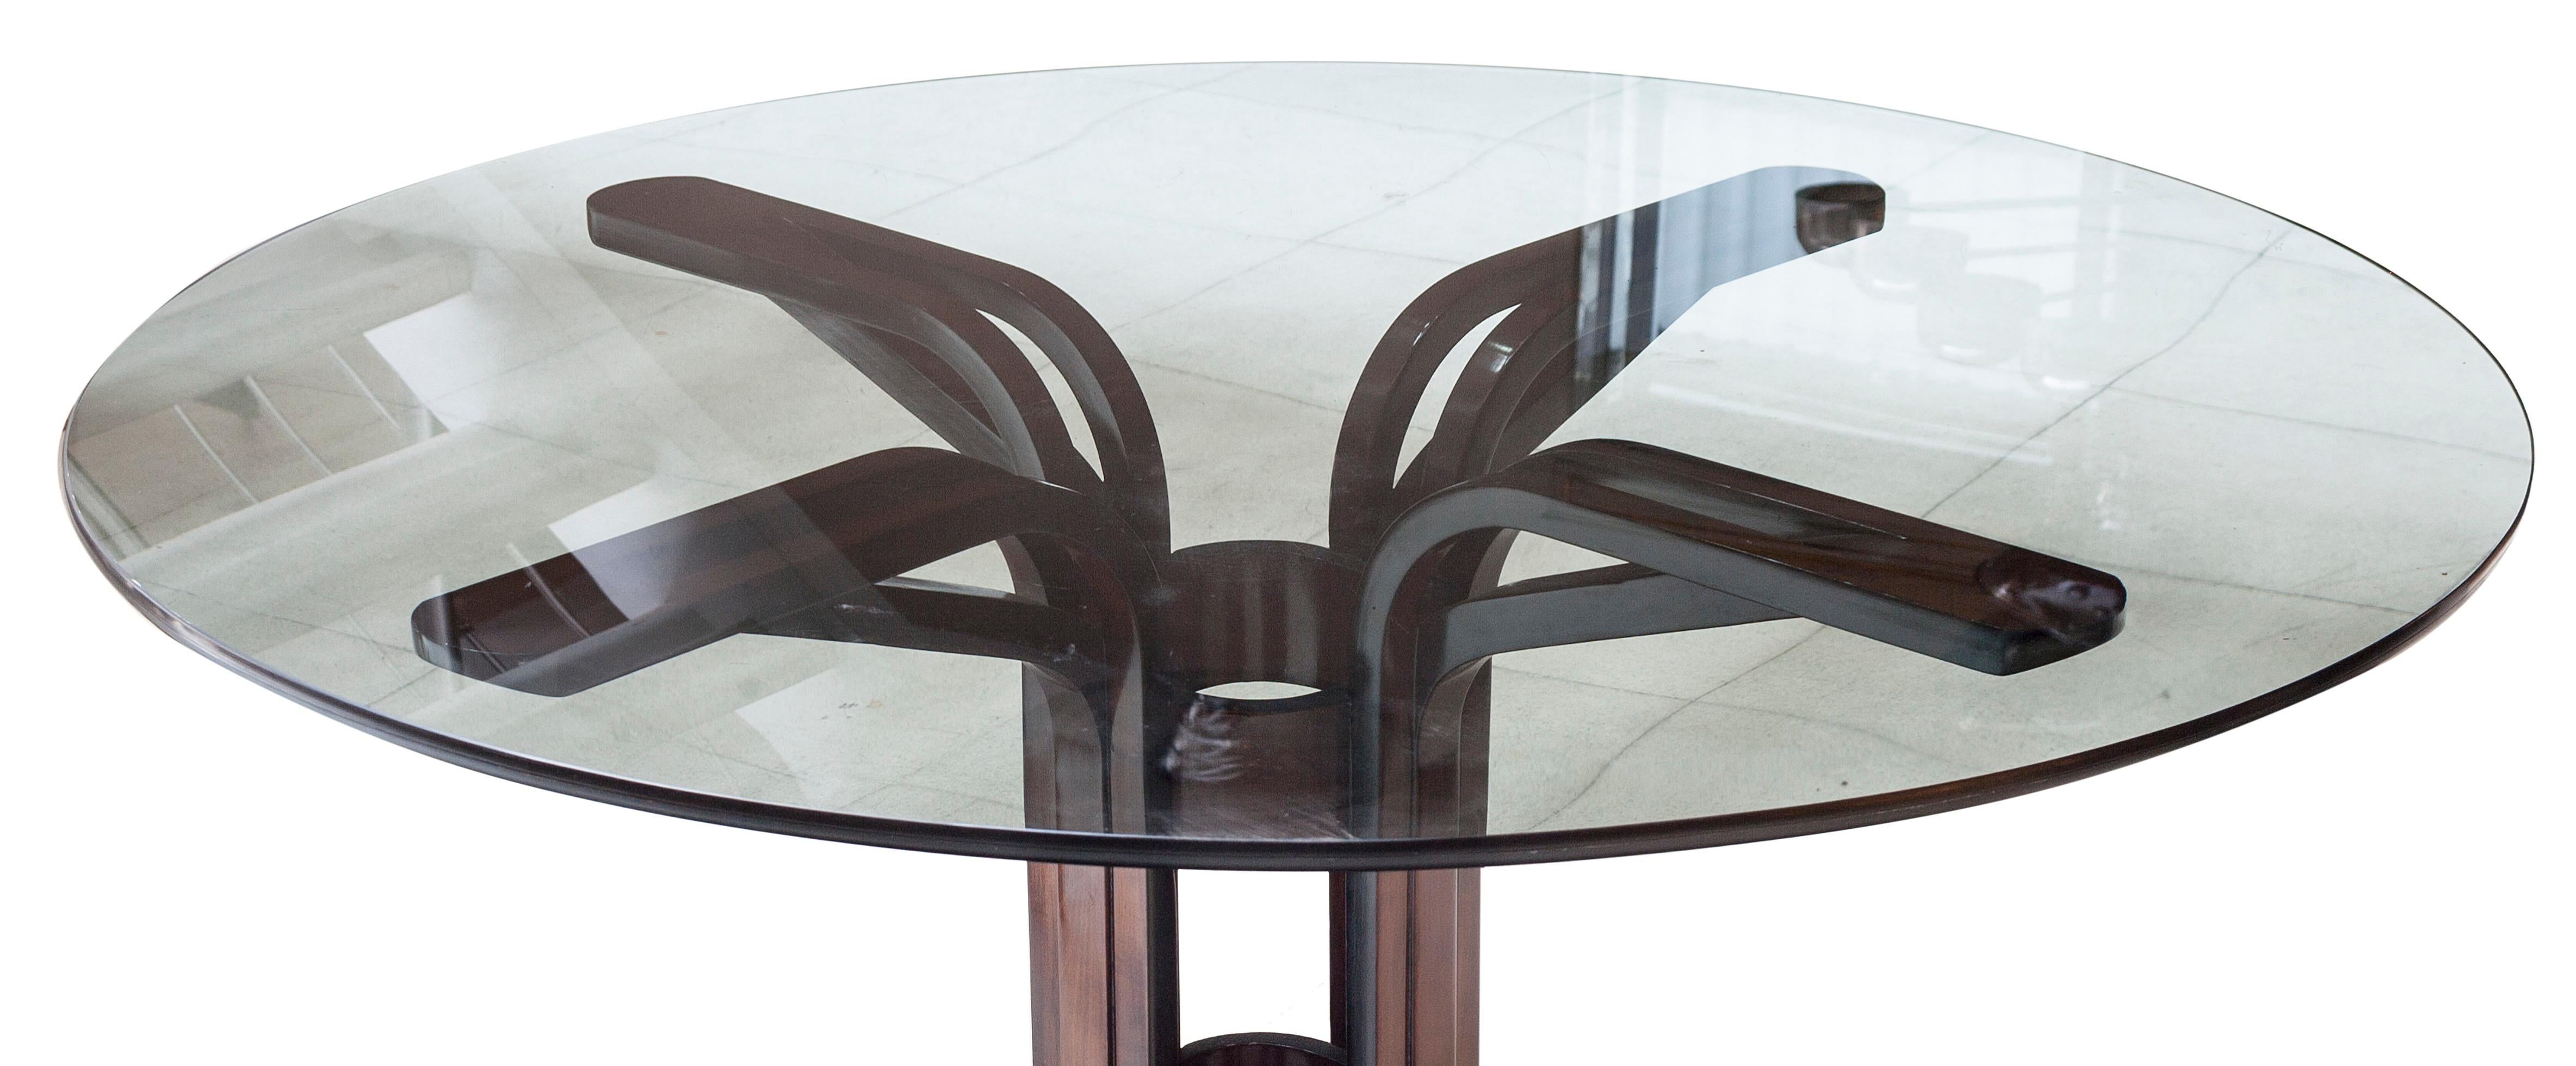 Dining table Art Deco

Year: 1920
Country: French
Wood and glass
Finish: polyurethanic lacquer
It is an elegant and sophisticated dining table.
You want to live in the golden years, this is the dining table that your project needs.
We have